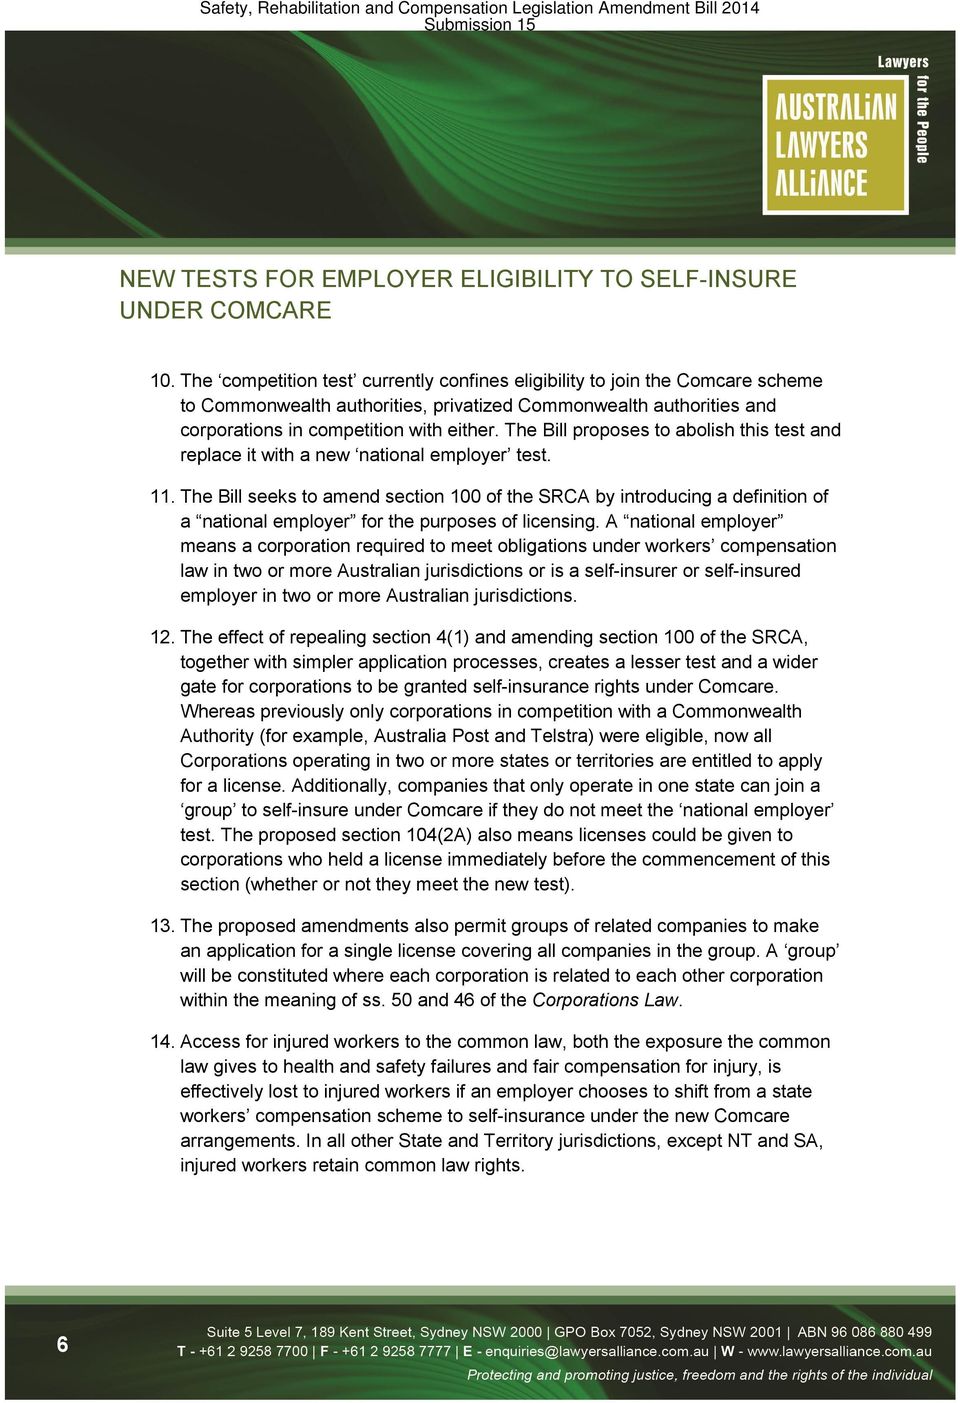 The Bill proposes to abolish this test and replace it with a new national employer test. 11.